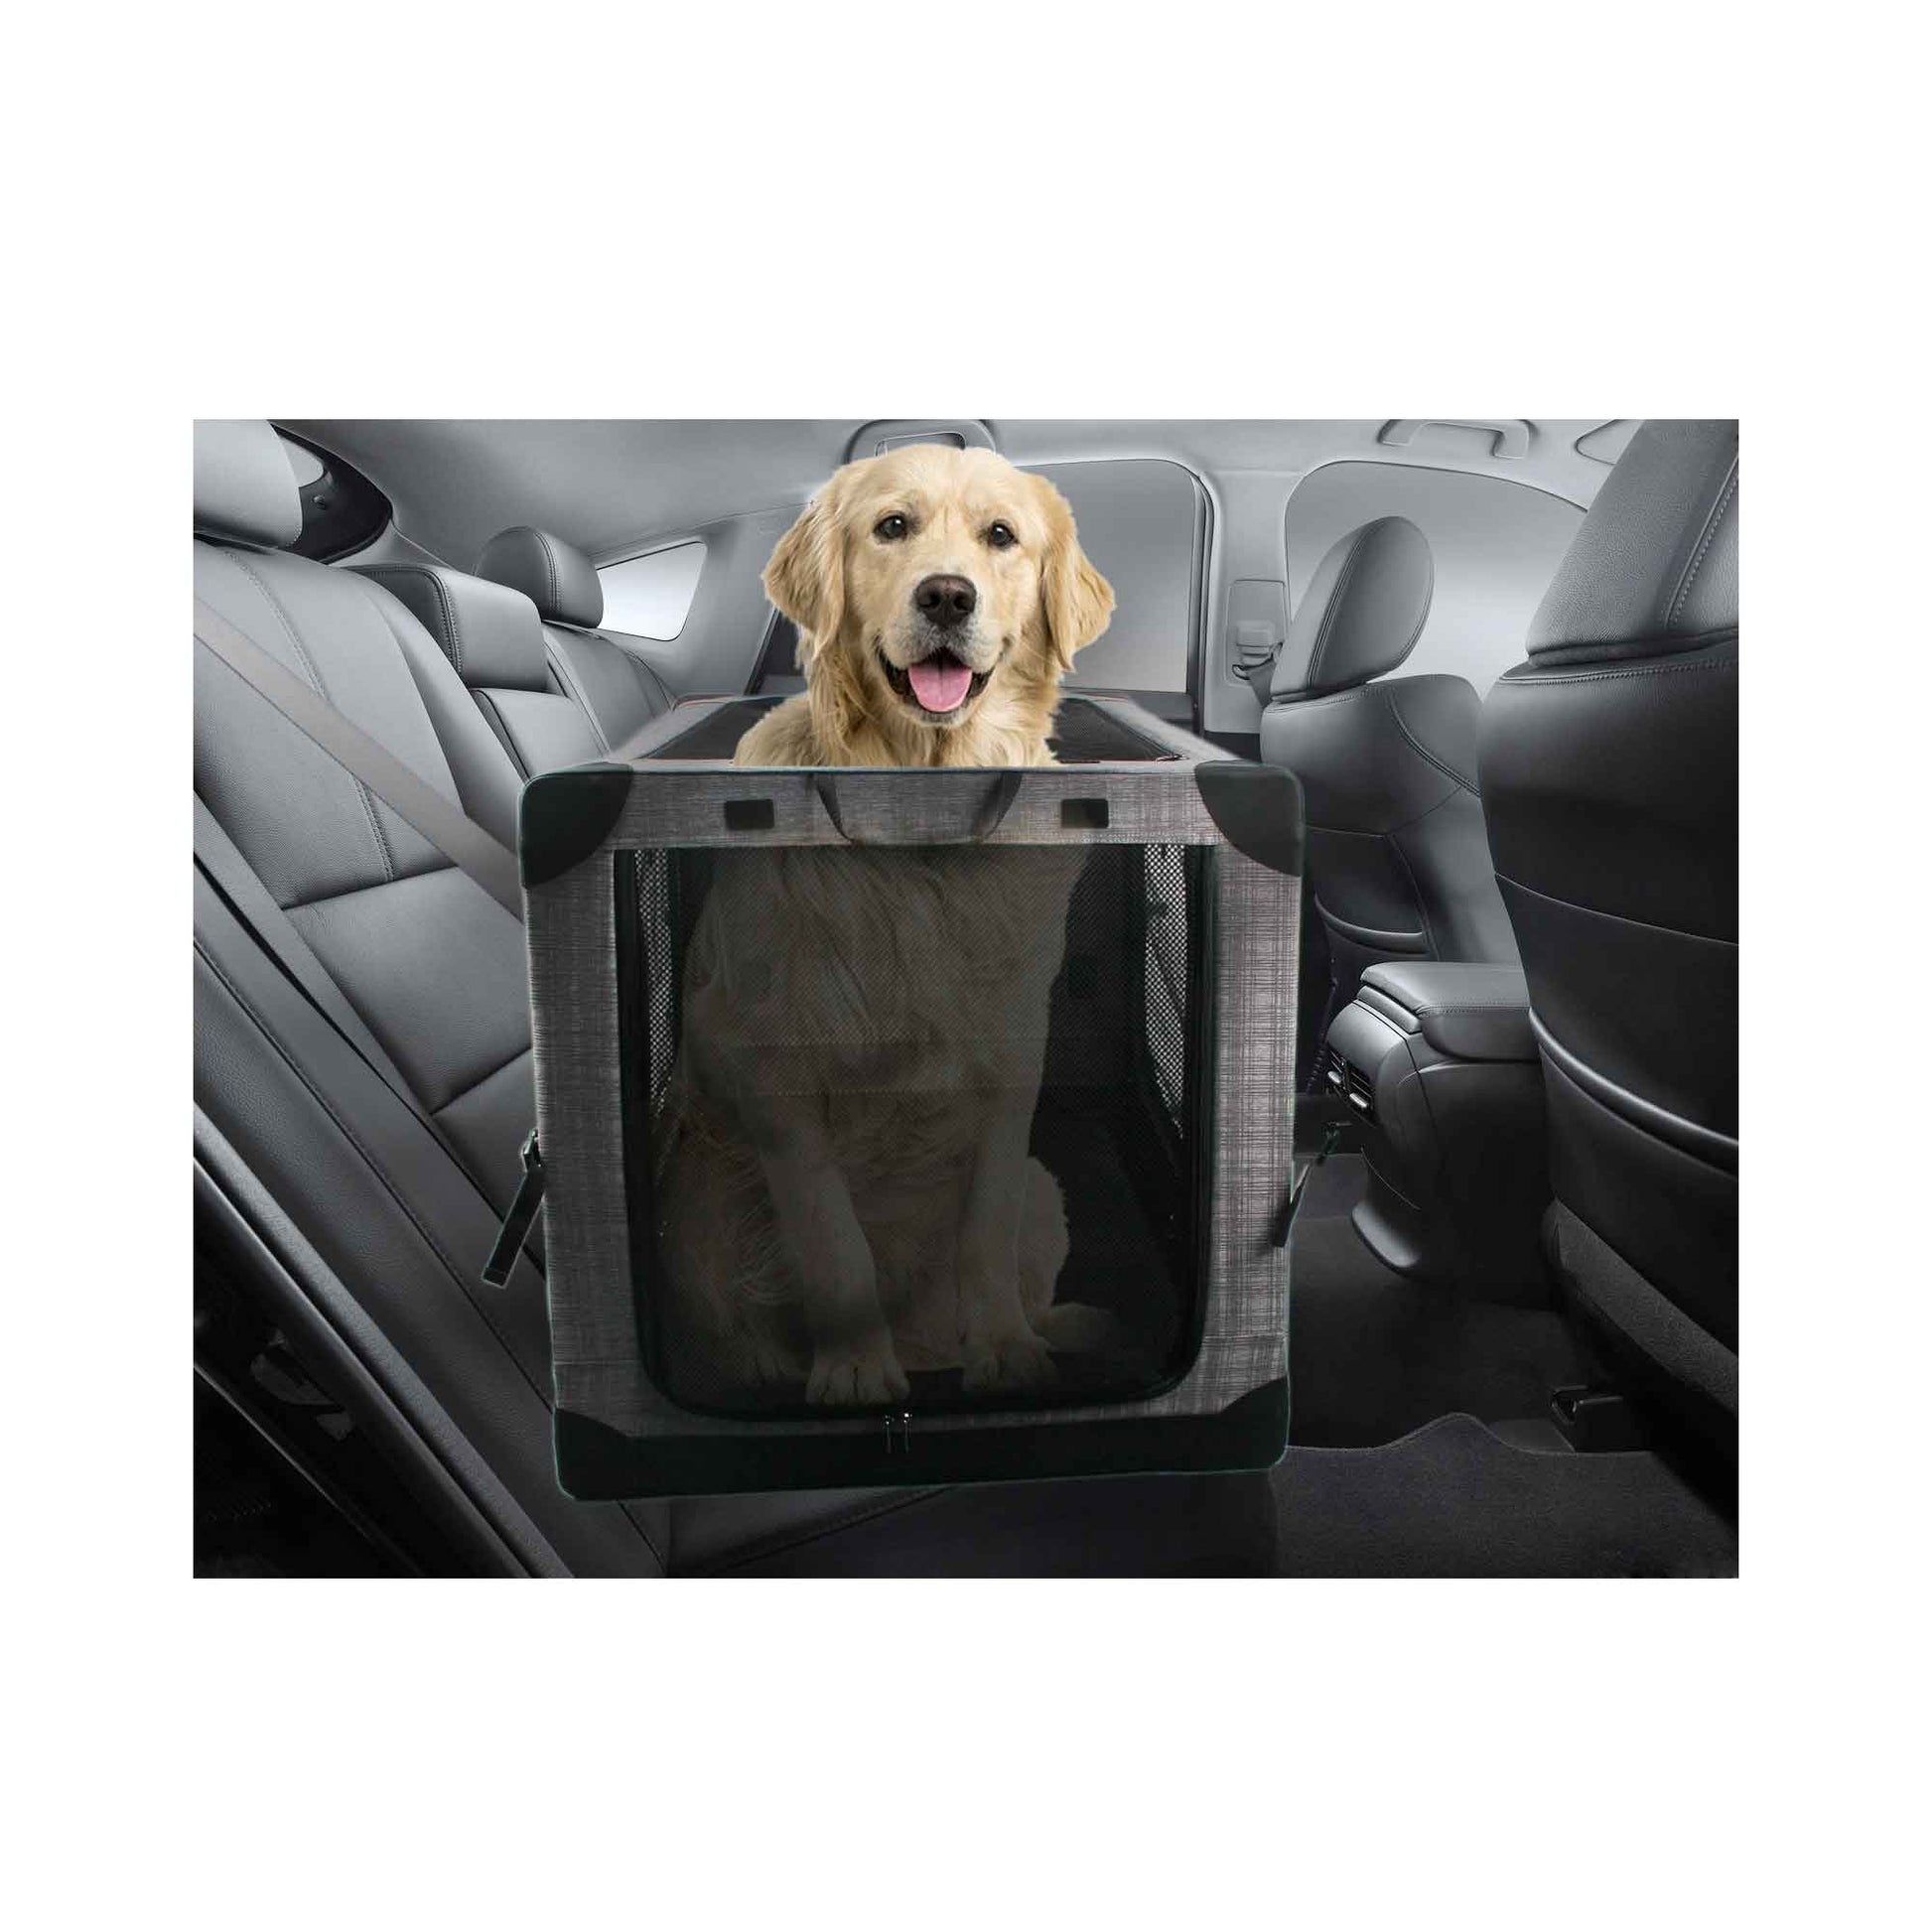 Collapsible Pet Travel Crate - X-Large Dog Cat Soft Foldable Portable Car Carrier